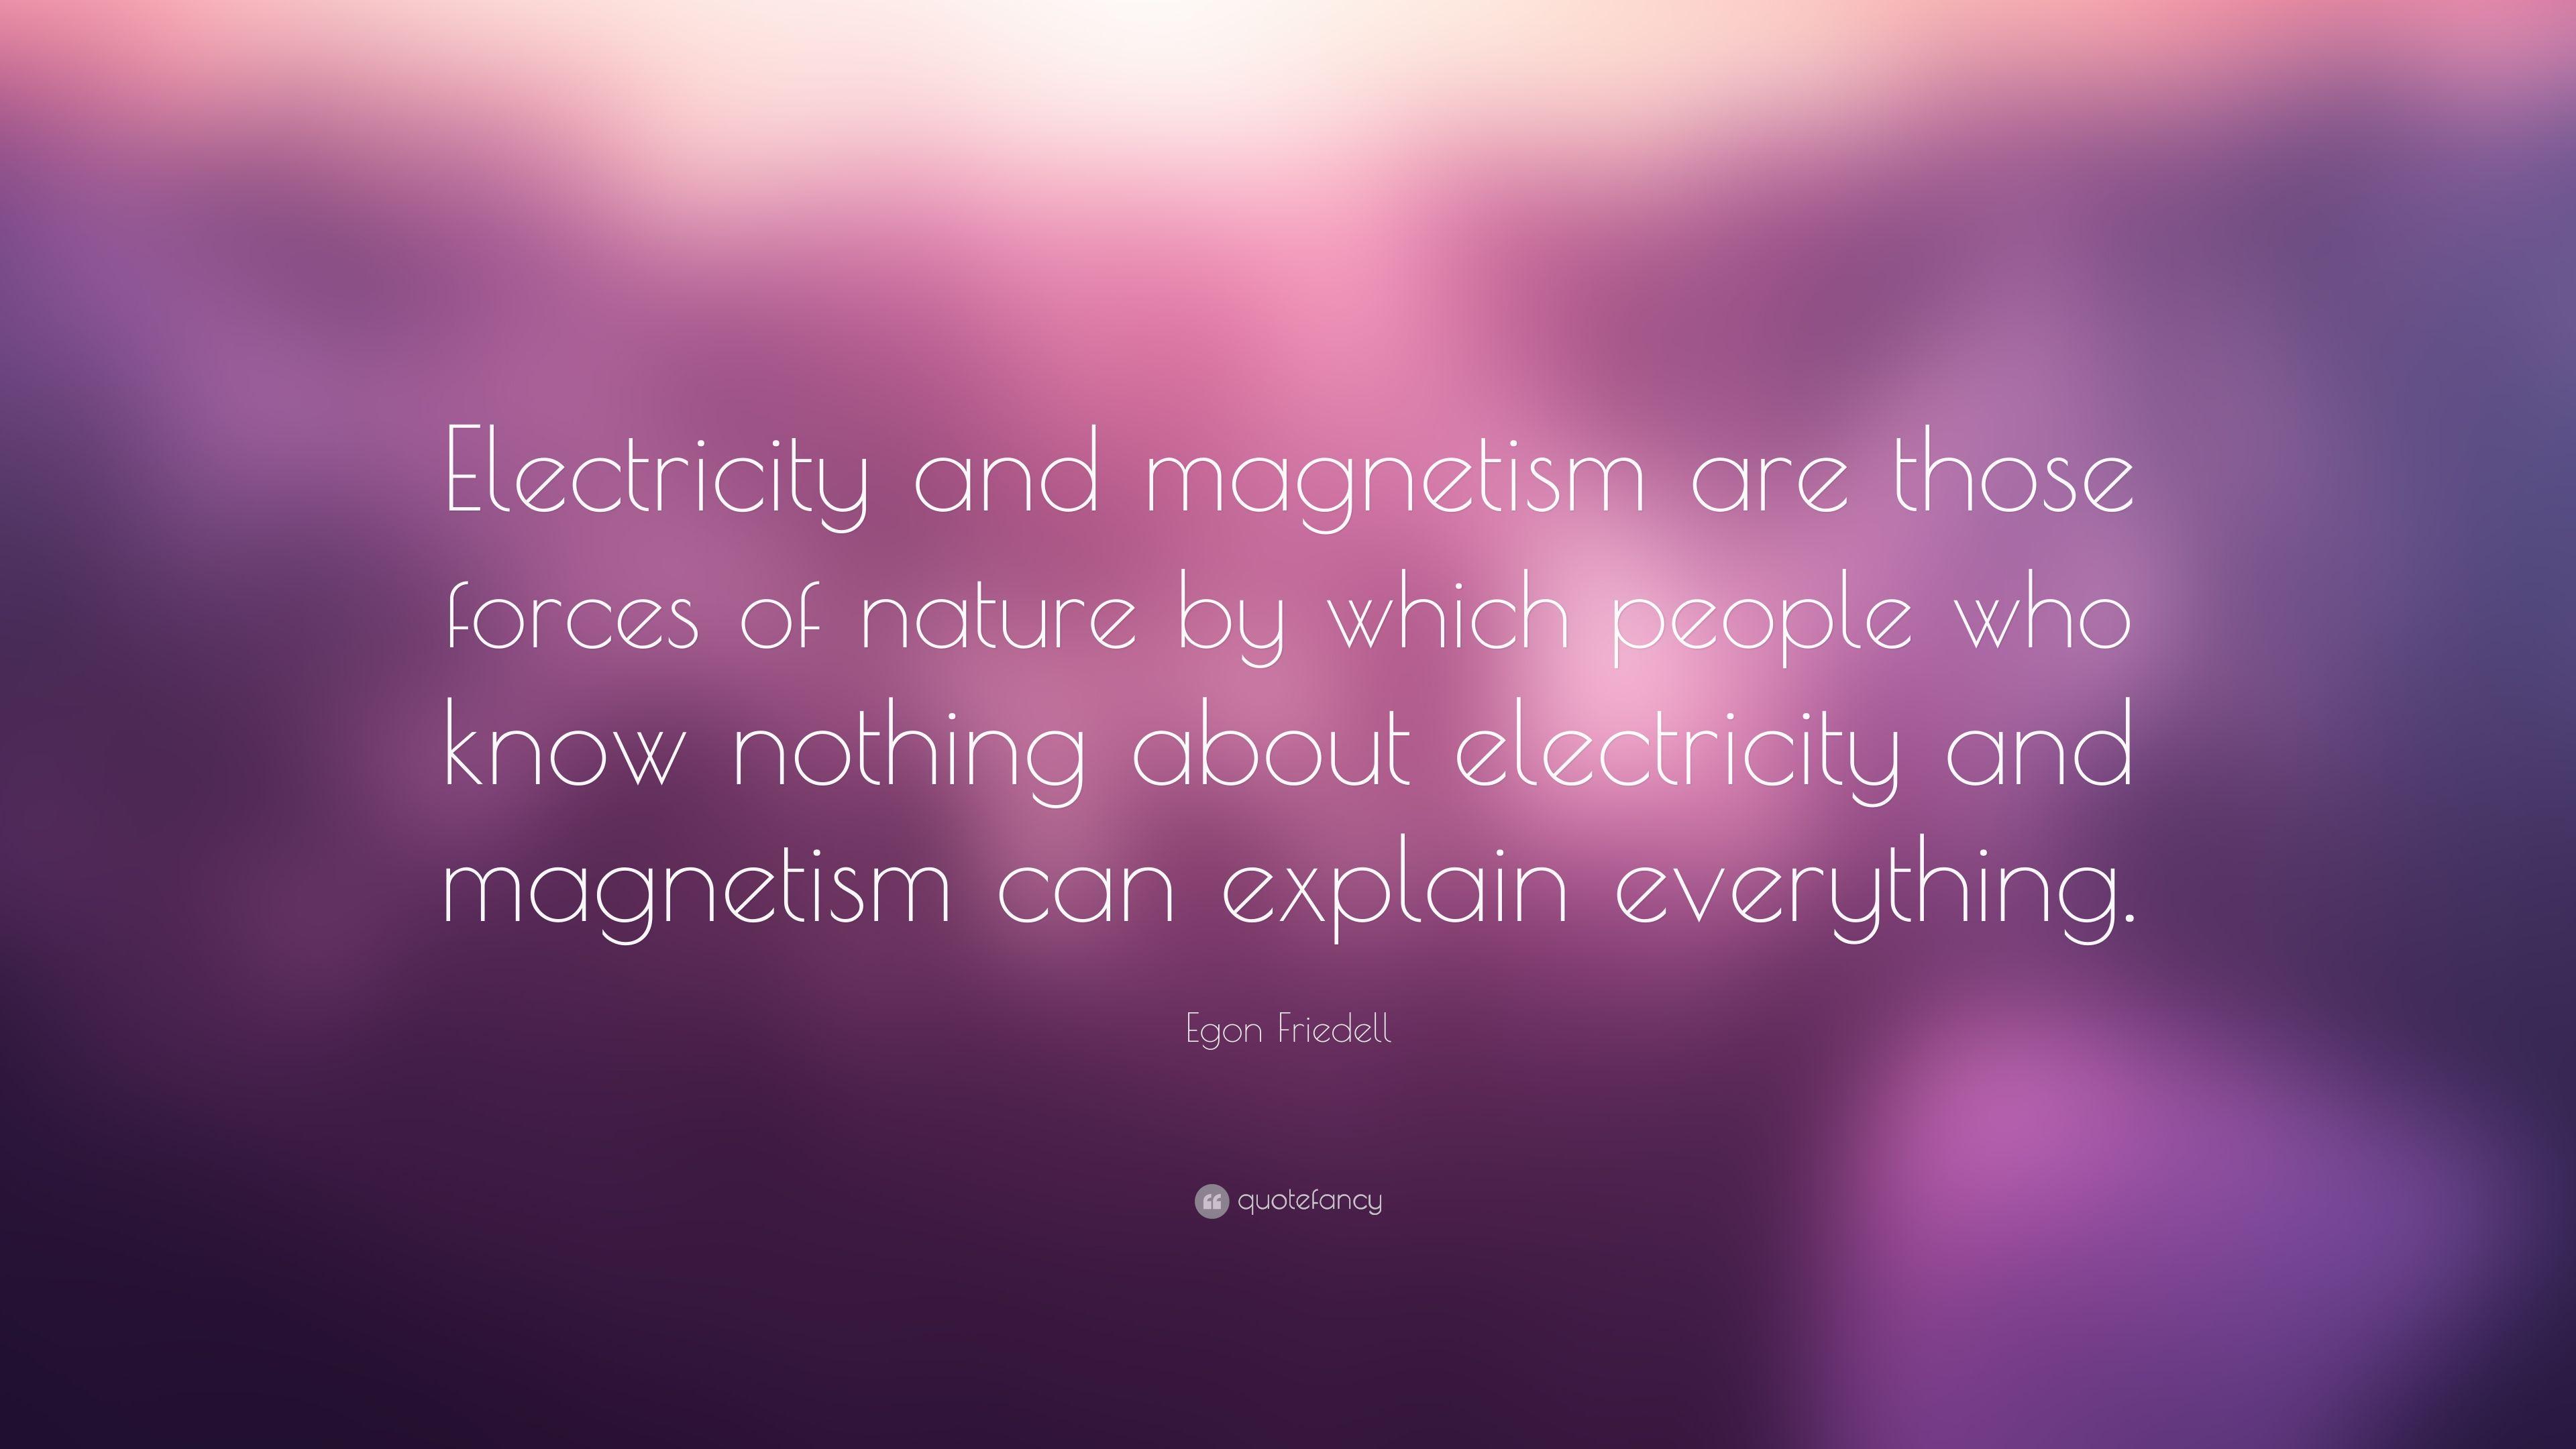 Egon Friedell Quote: “Electricity and magnetism are those